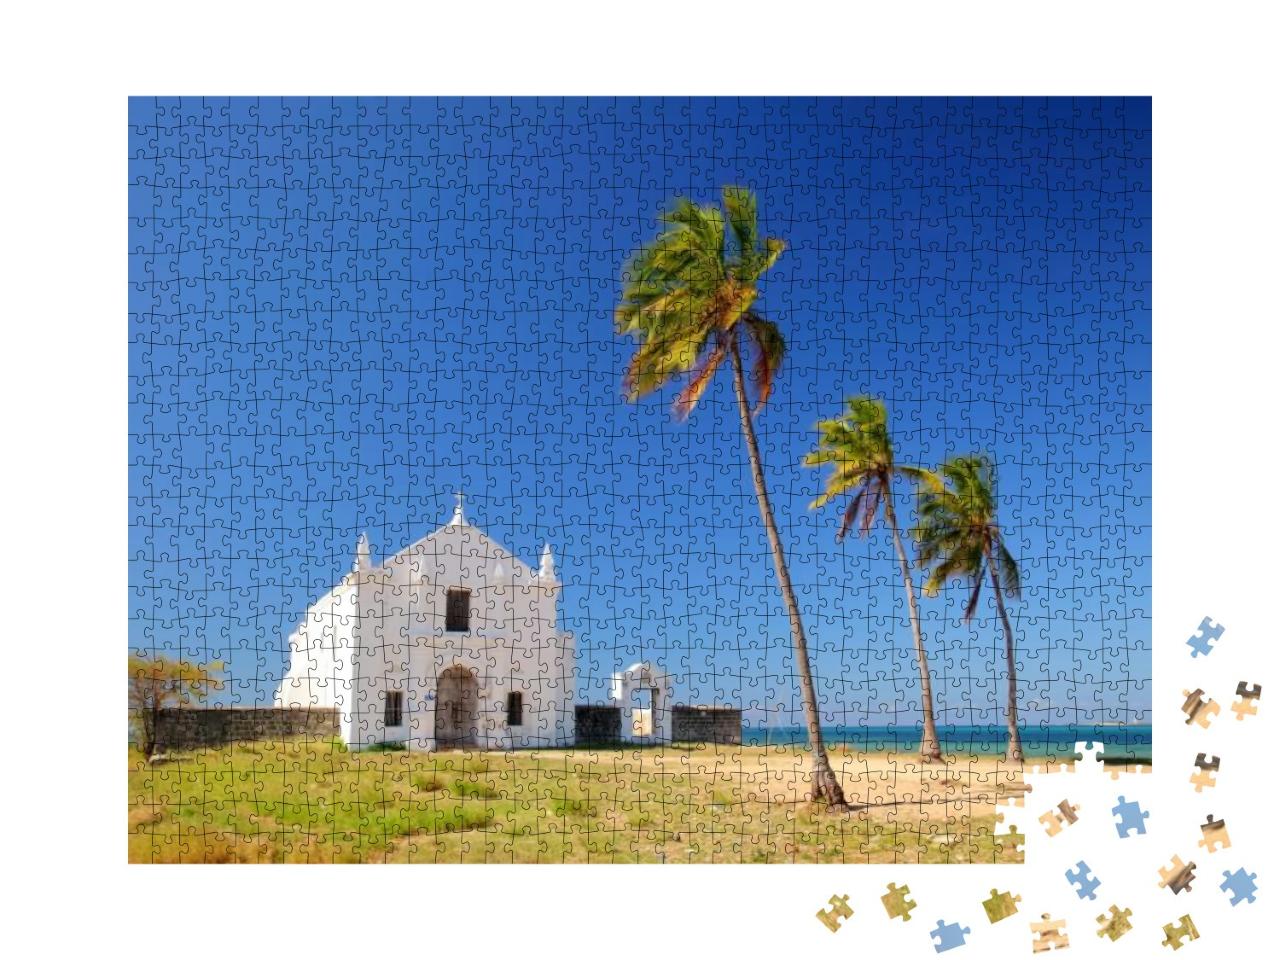 Mozambique Island... Jigsaw Puzzle with 1000 pieces